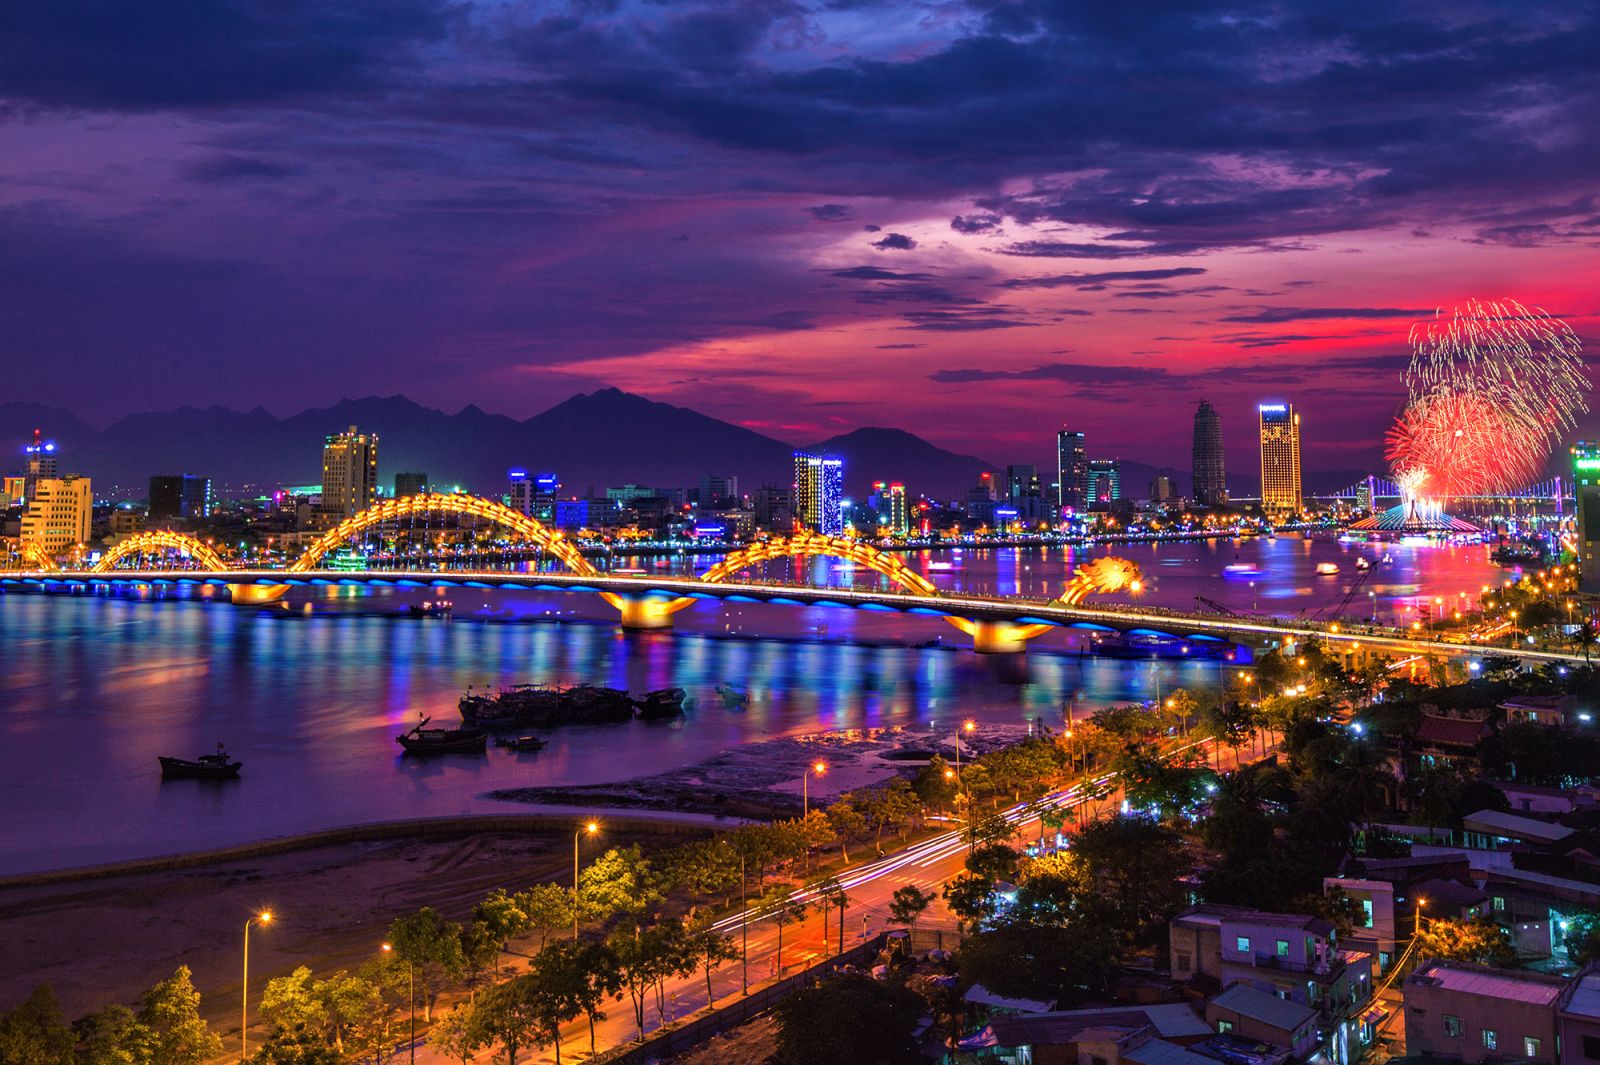 Post-Covid-19: Danang tourism is promoted daily on the BBC for 1 month